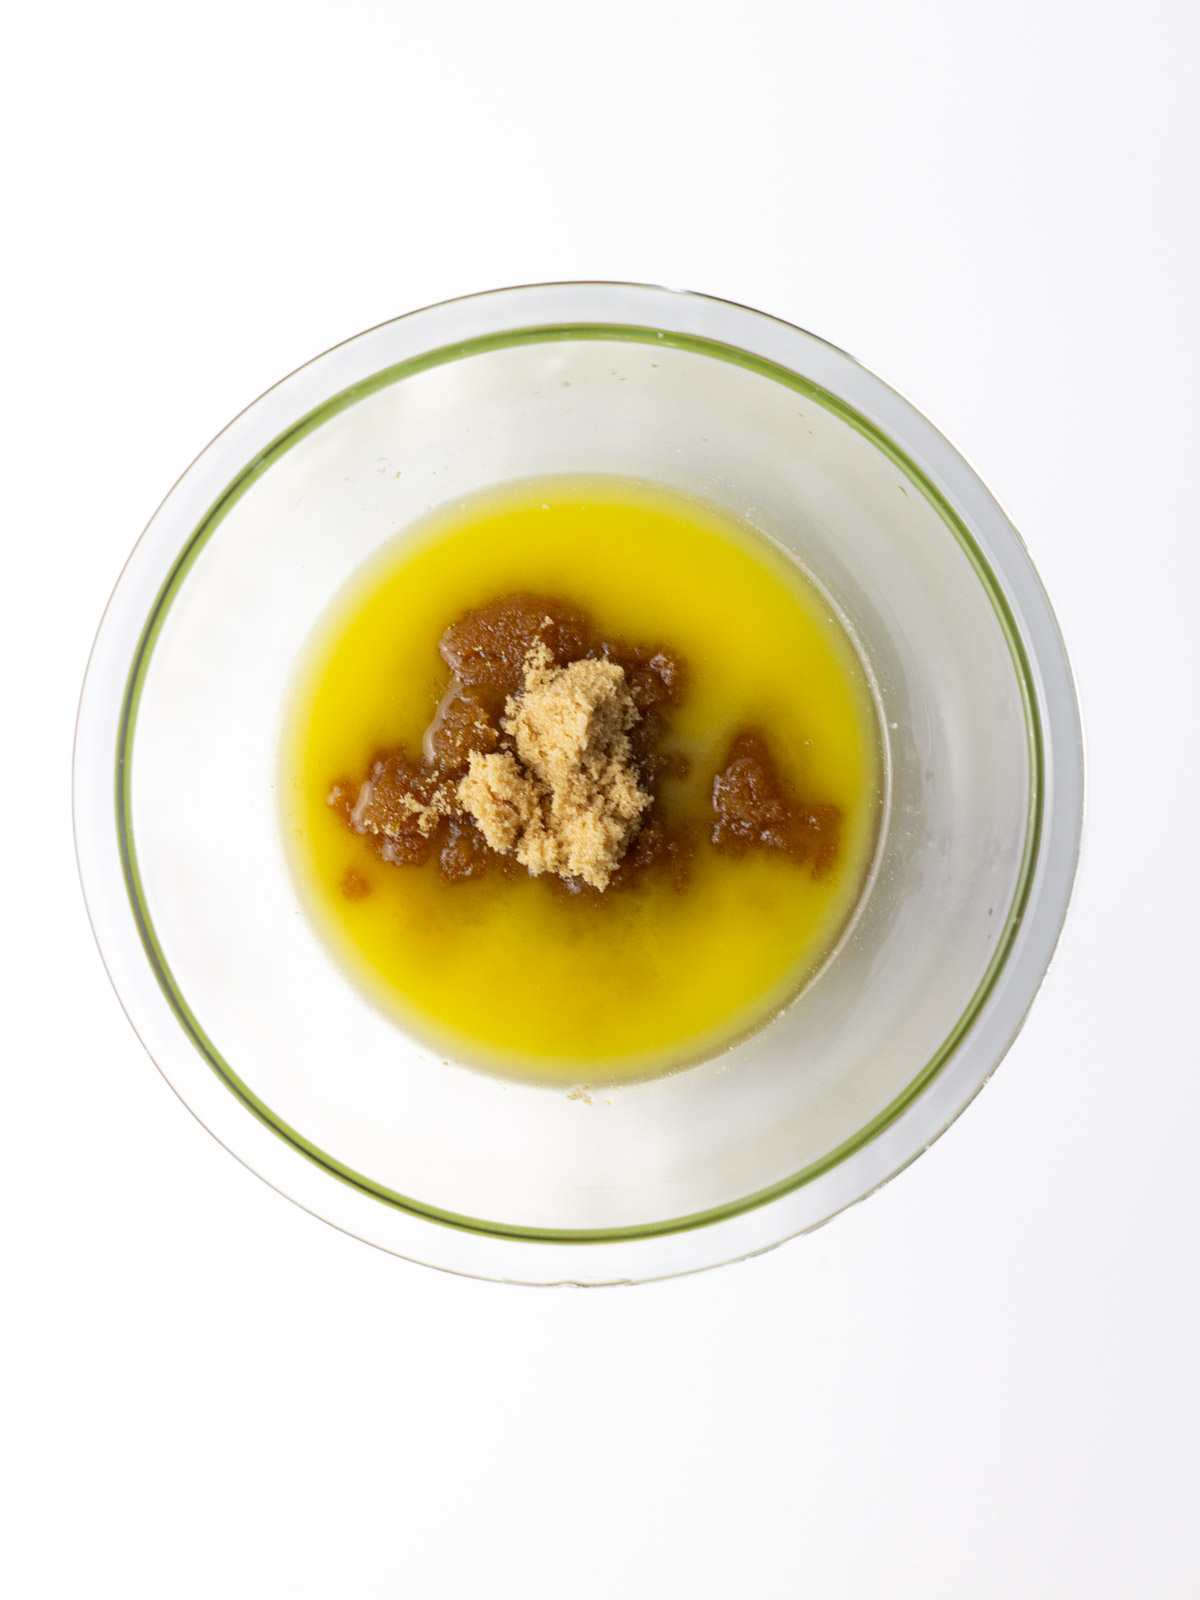 Melted butter and brown sugar in a glass mixing bowl on a white surface.